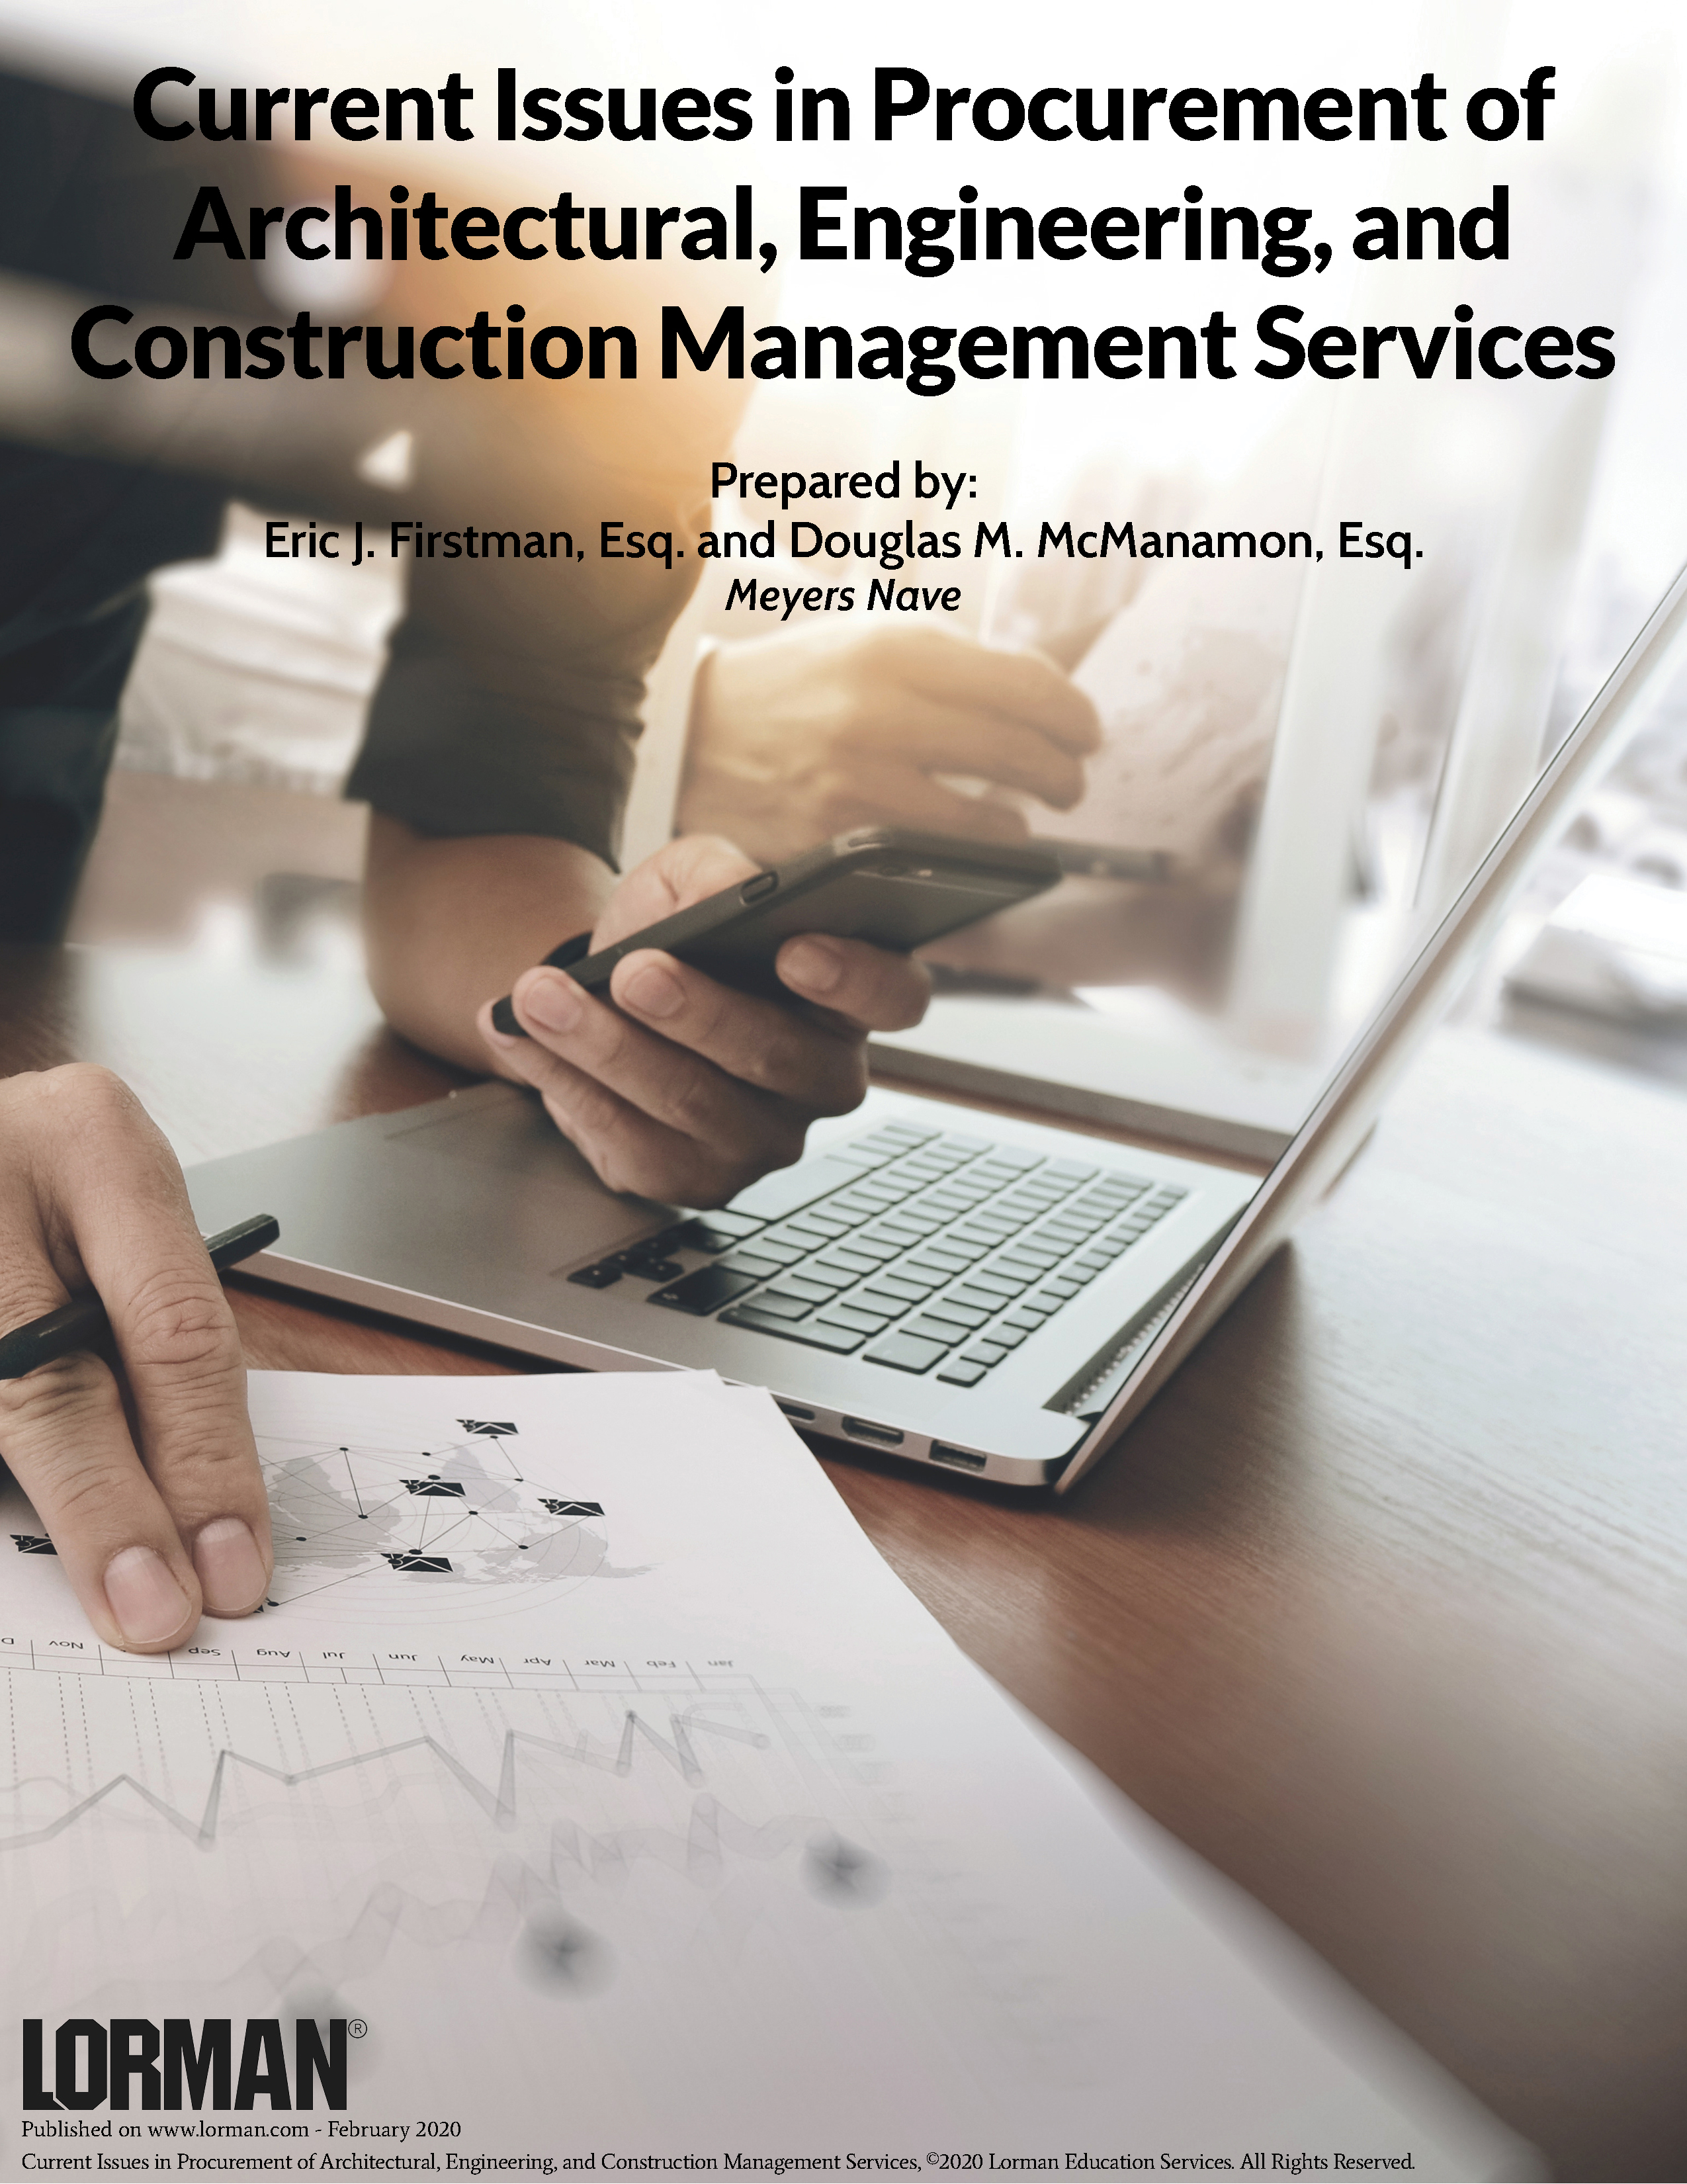 Current Issues in Procurement of Architectural, Engineering, and Construction Management Services